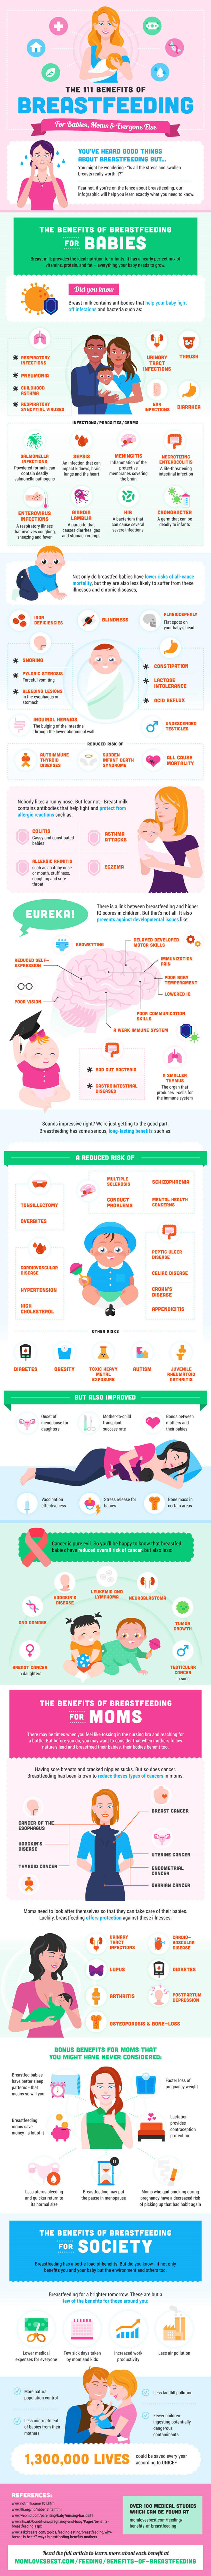 Advantages of Breastfeeding for Mother Infographic